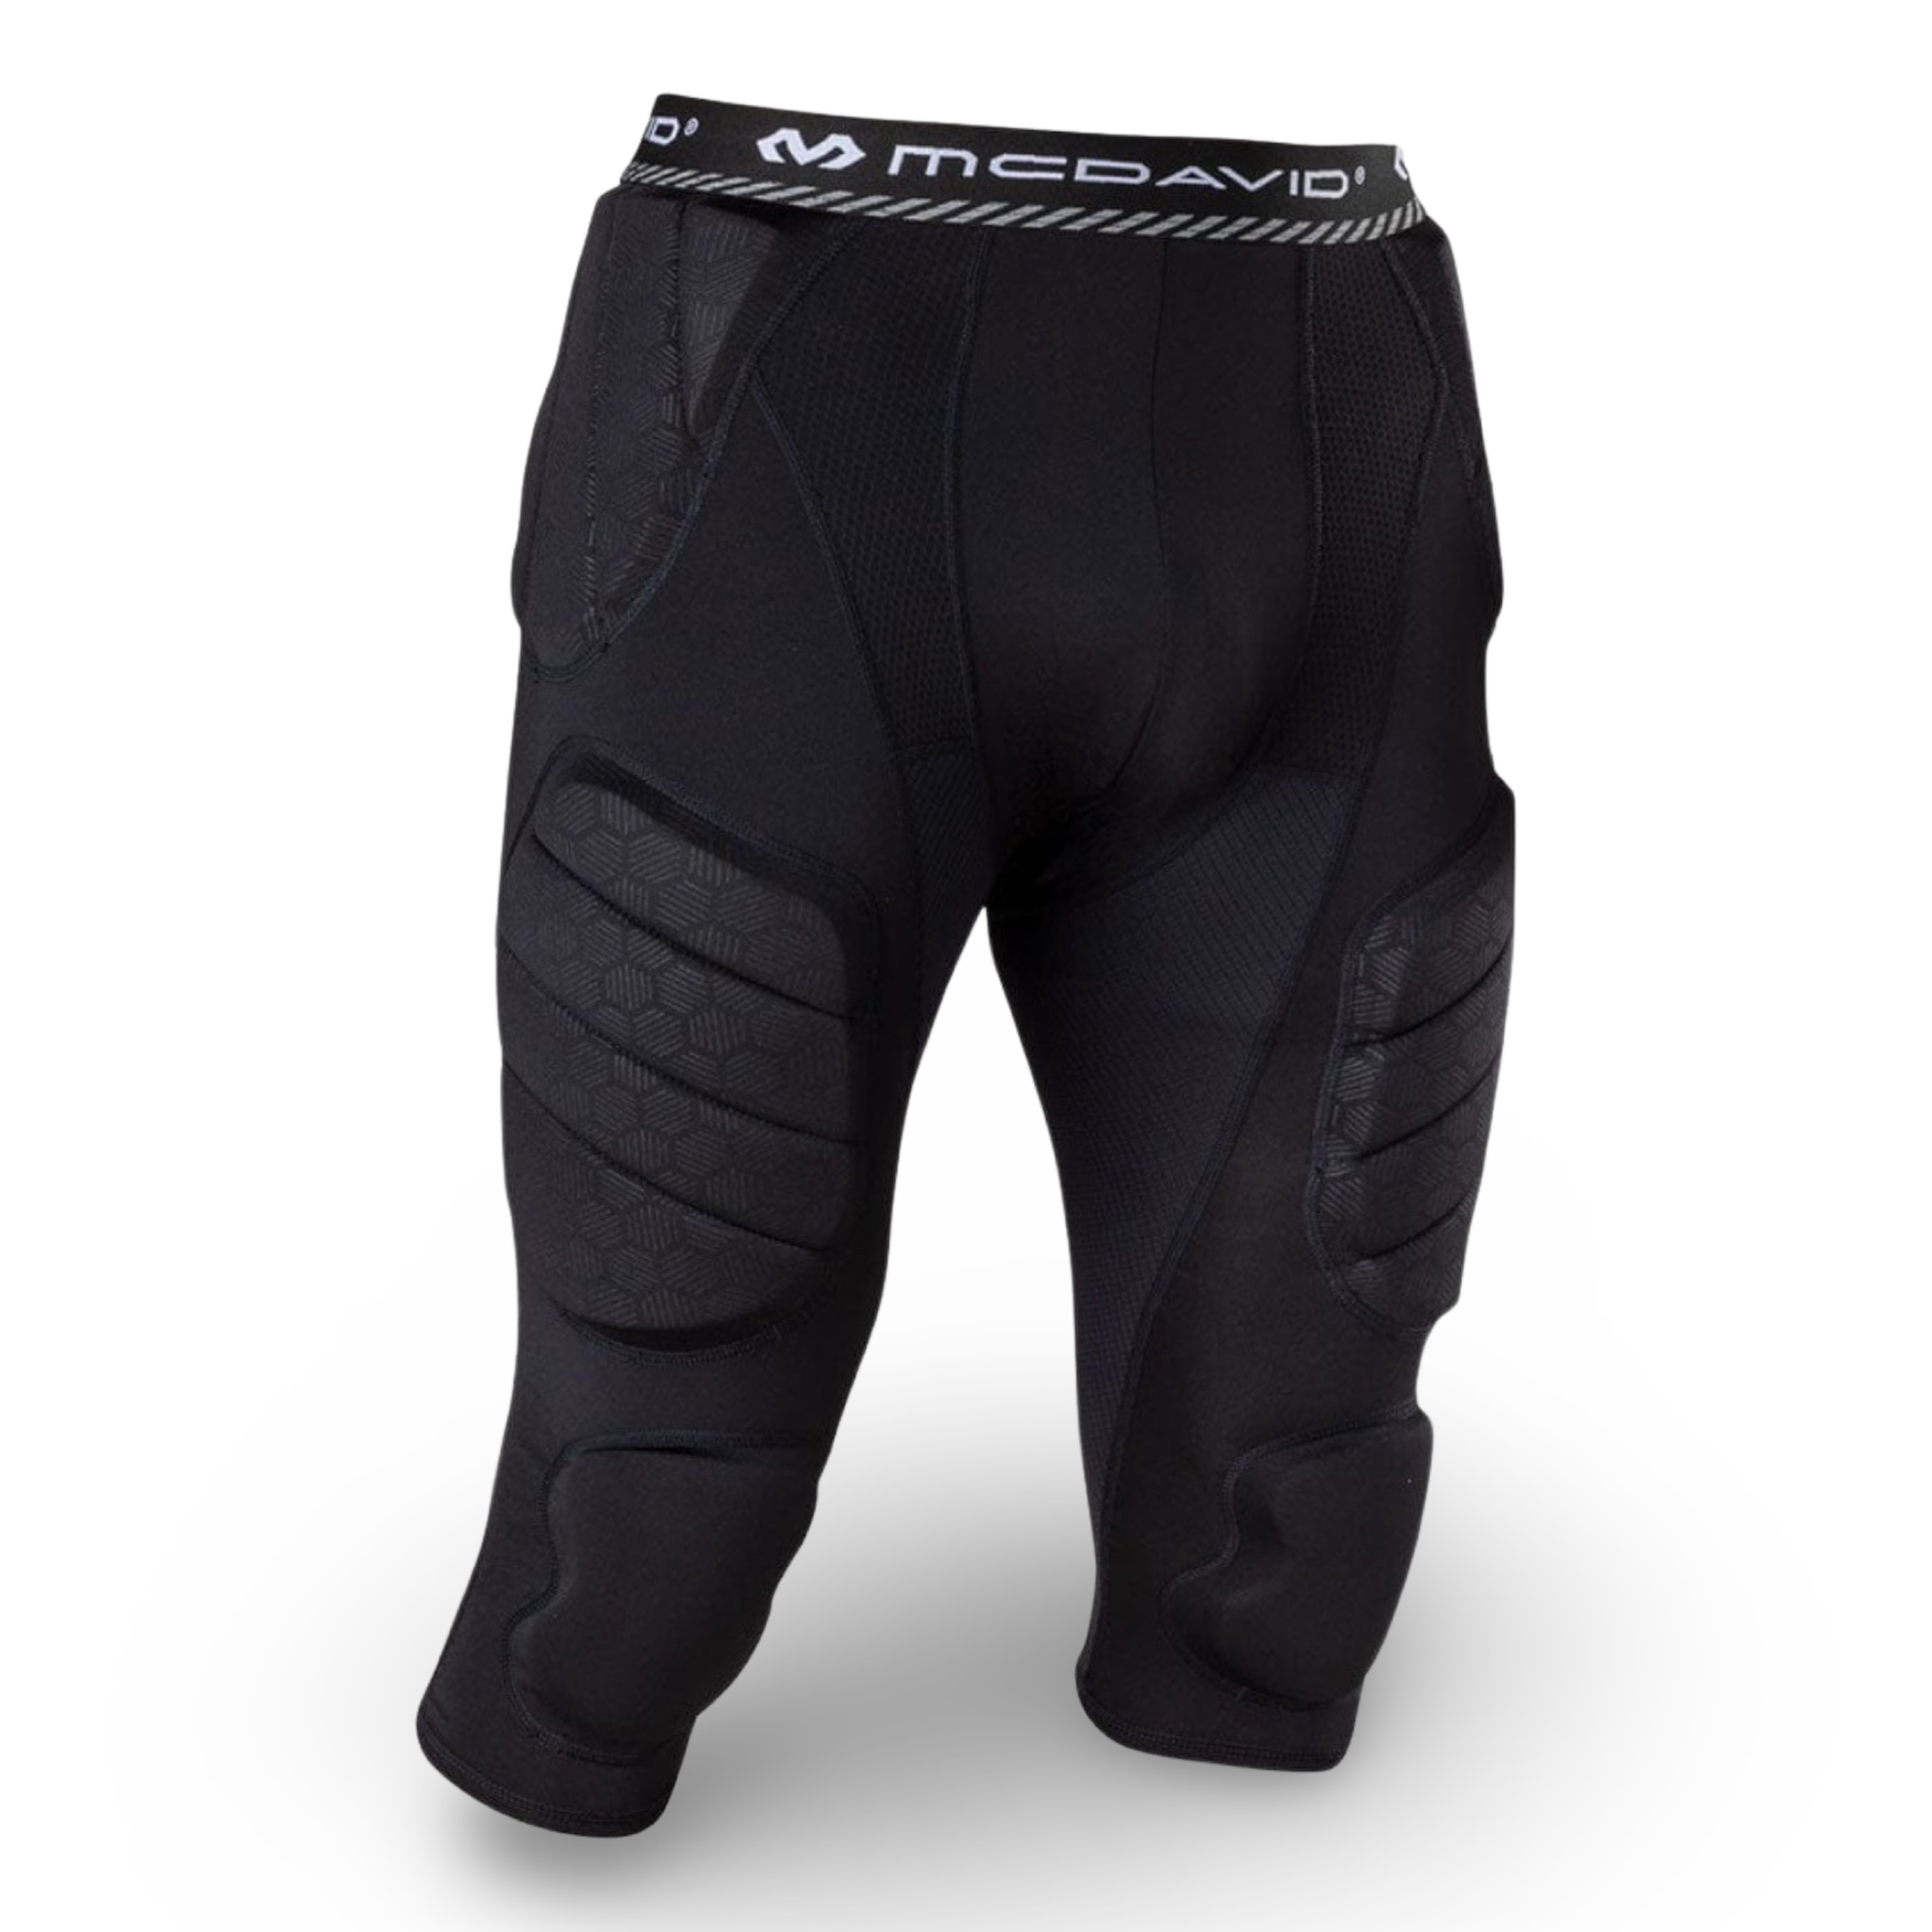 MD Rival™ 7-Pad ¾ Football Girdle - Adult &amp; Youth